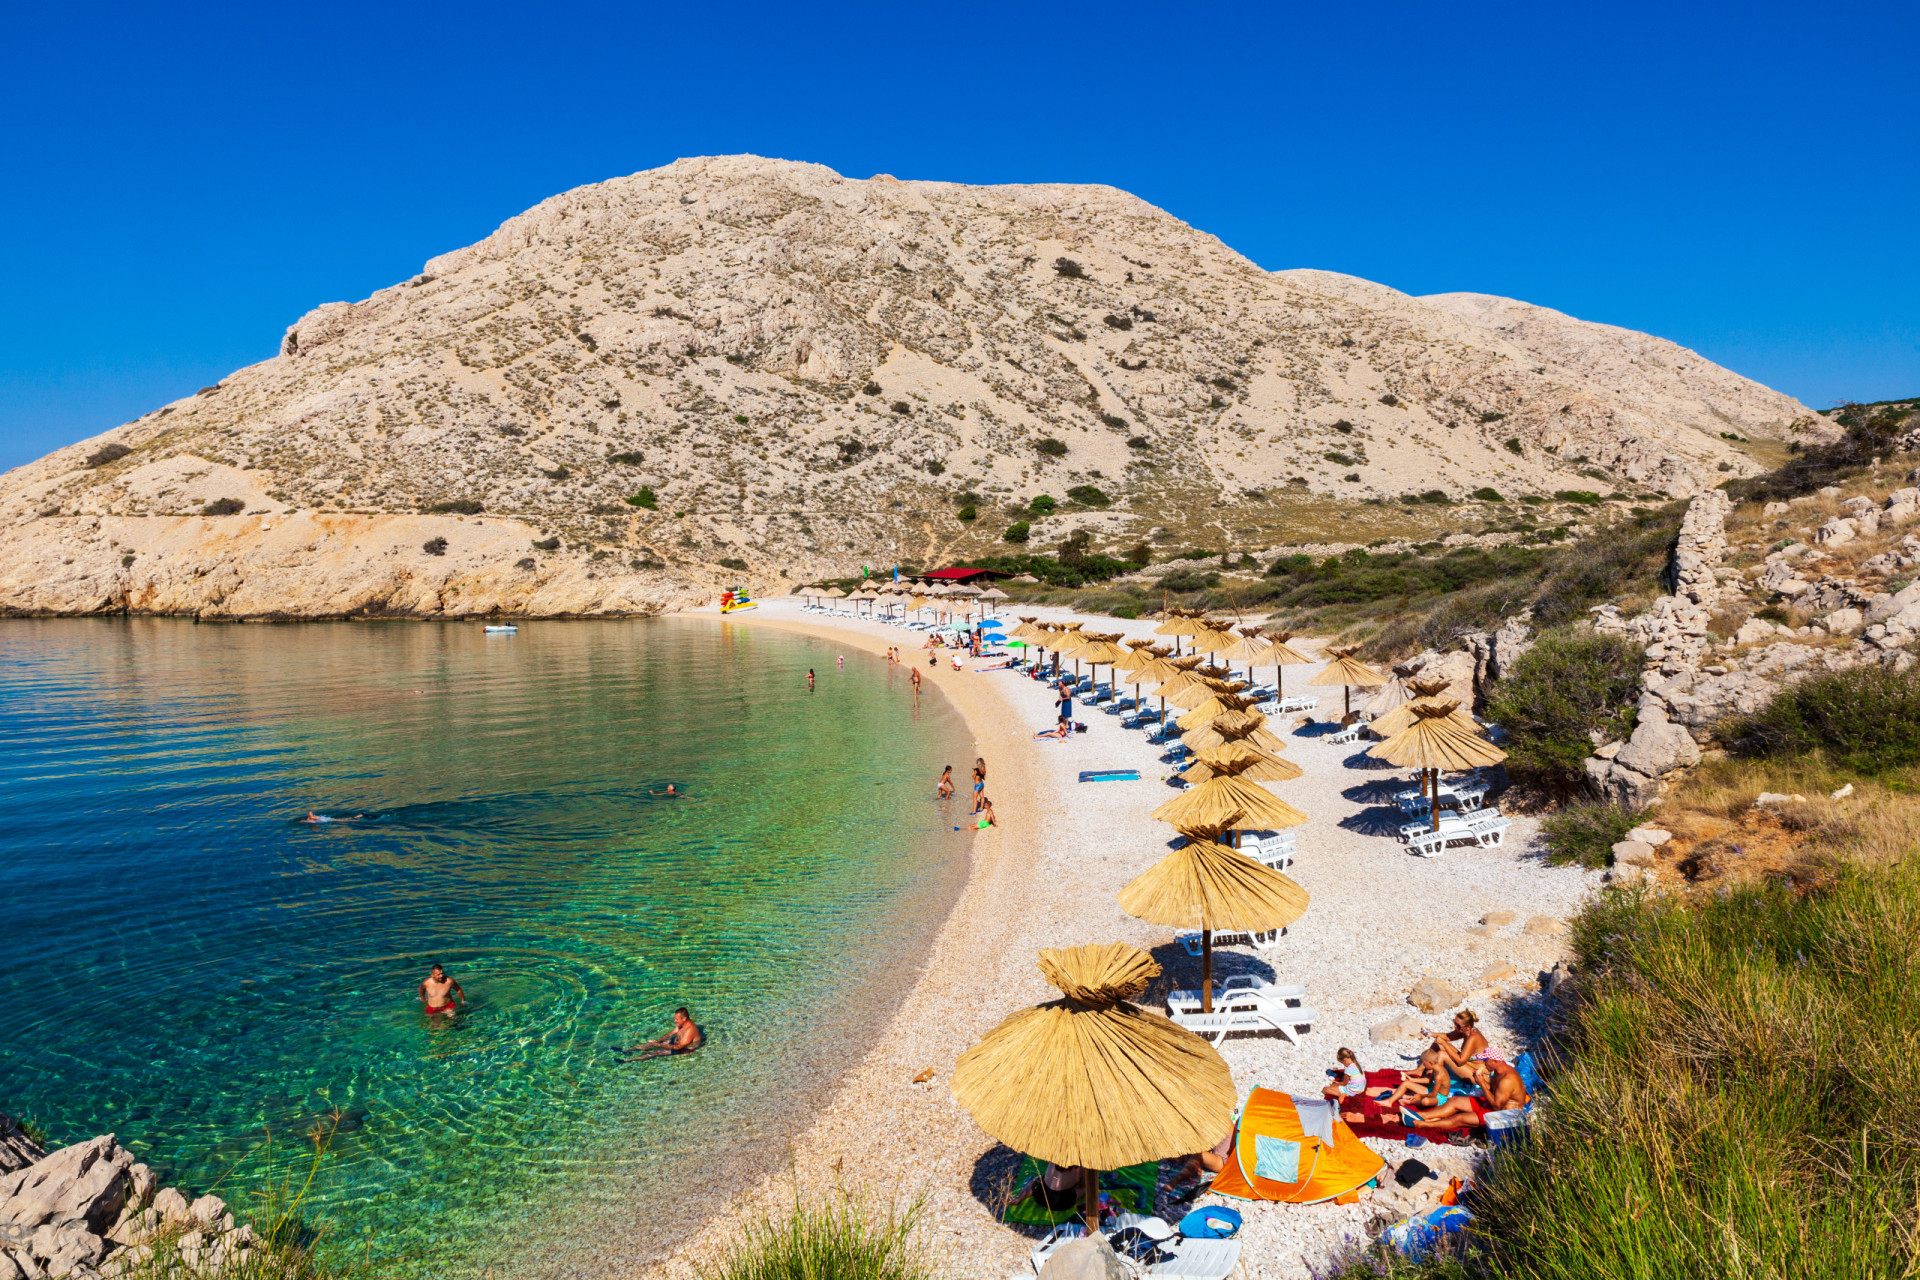 <p>Score: 4.011</p> <p>An idyllic pebble beach, Oprna Bay is a true gem and one of the most beautiful beaches on the <a href="https://www.starsinsider.com/travel/516871/crisscrossing-your-way-through-croatia" rel="noopener">Croatian</a> island of Krk.</p><p>You may also like:<a href="https://www.starsinsider.com/n/486929?utm_source=msn.com&utm_medium=display&utm_campaign=referral_description&utm_content=697708en-en_selected"> Famous historical miscarriages of justice</a></p>